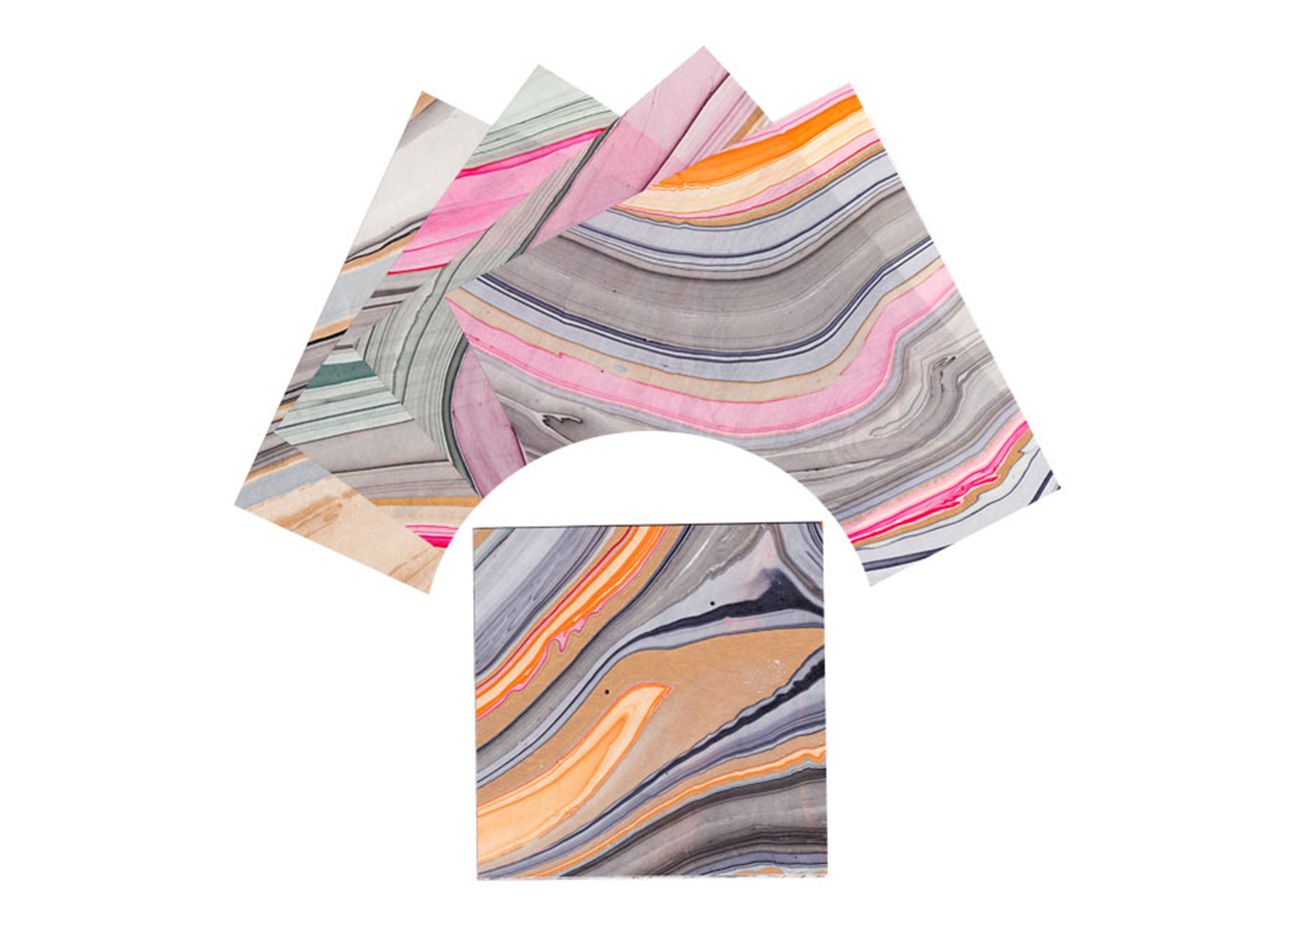 Marbled, multicolor origami paper.